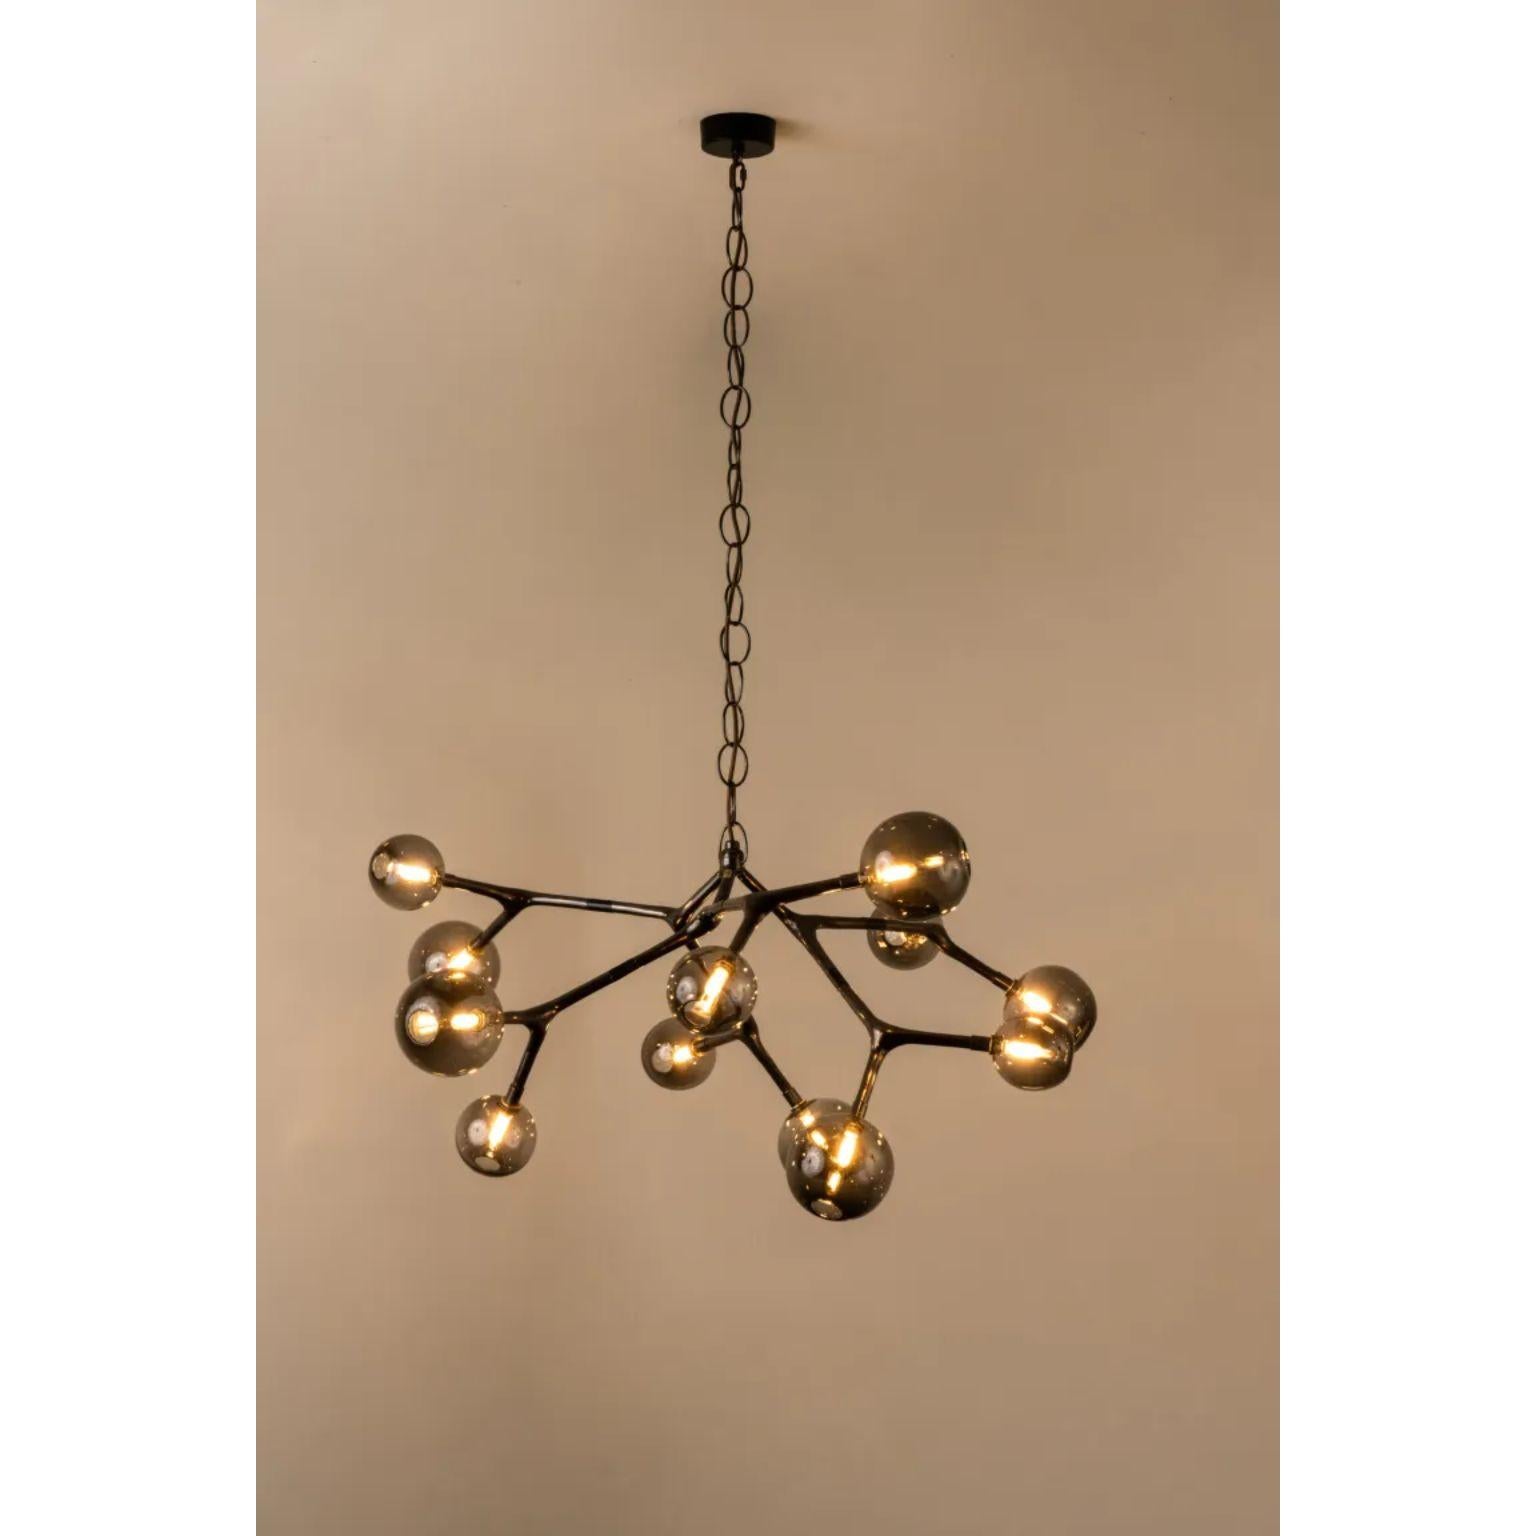 Cast Blue Smoke and Polished Bronze Maratus 12 Pendant Lamp by Isabel Moncada For Sale